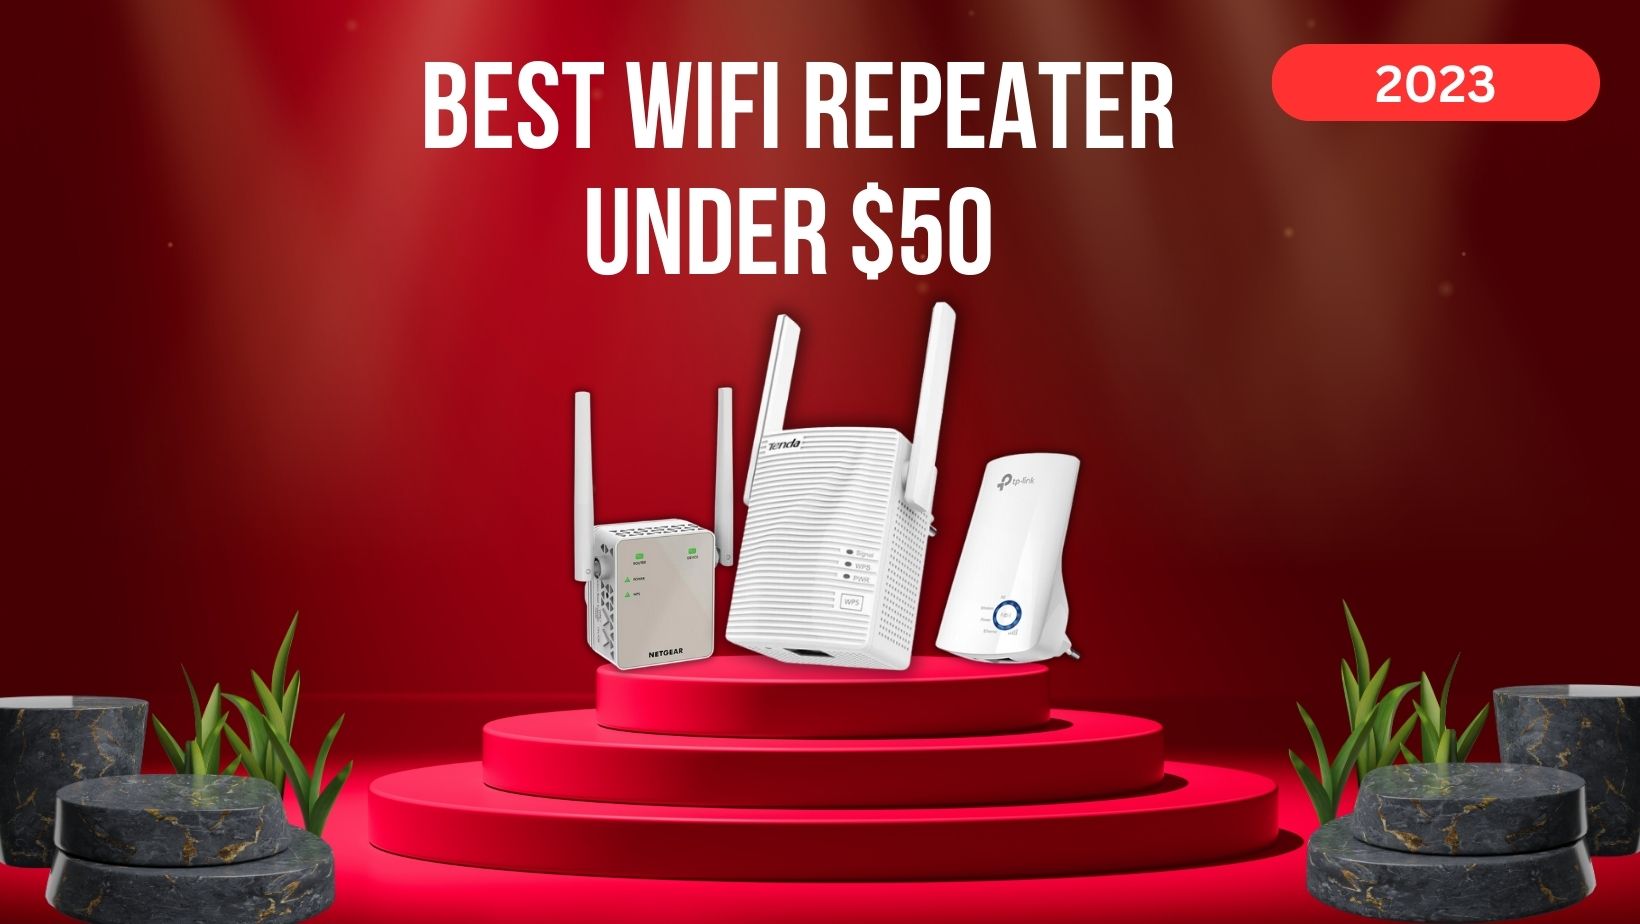 Best WiFi Repeater Under $50 2023